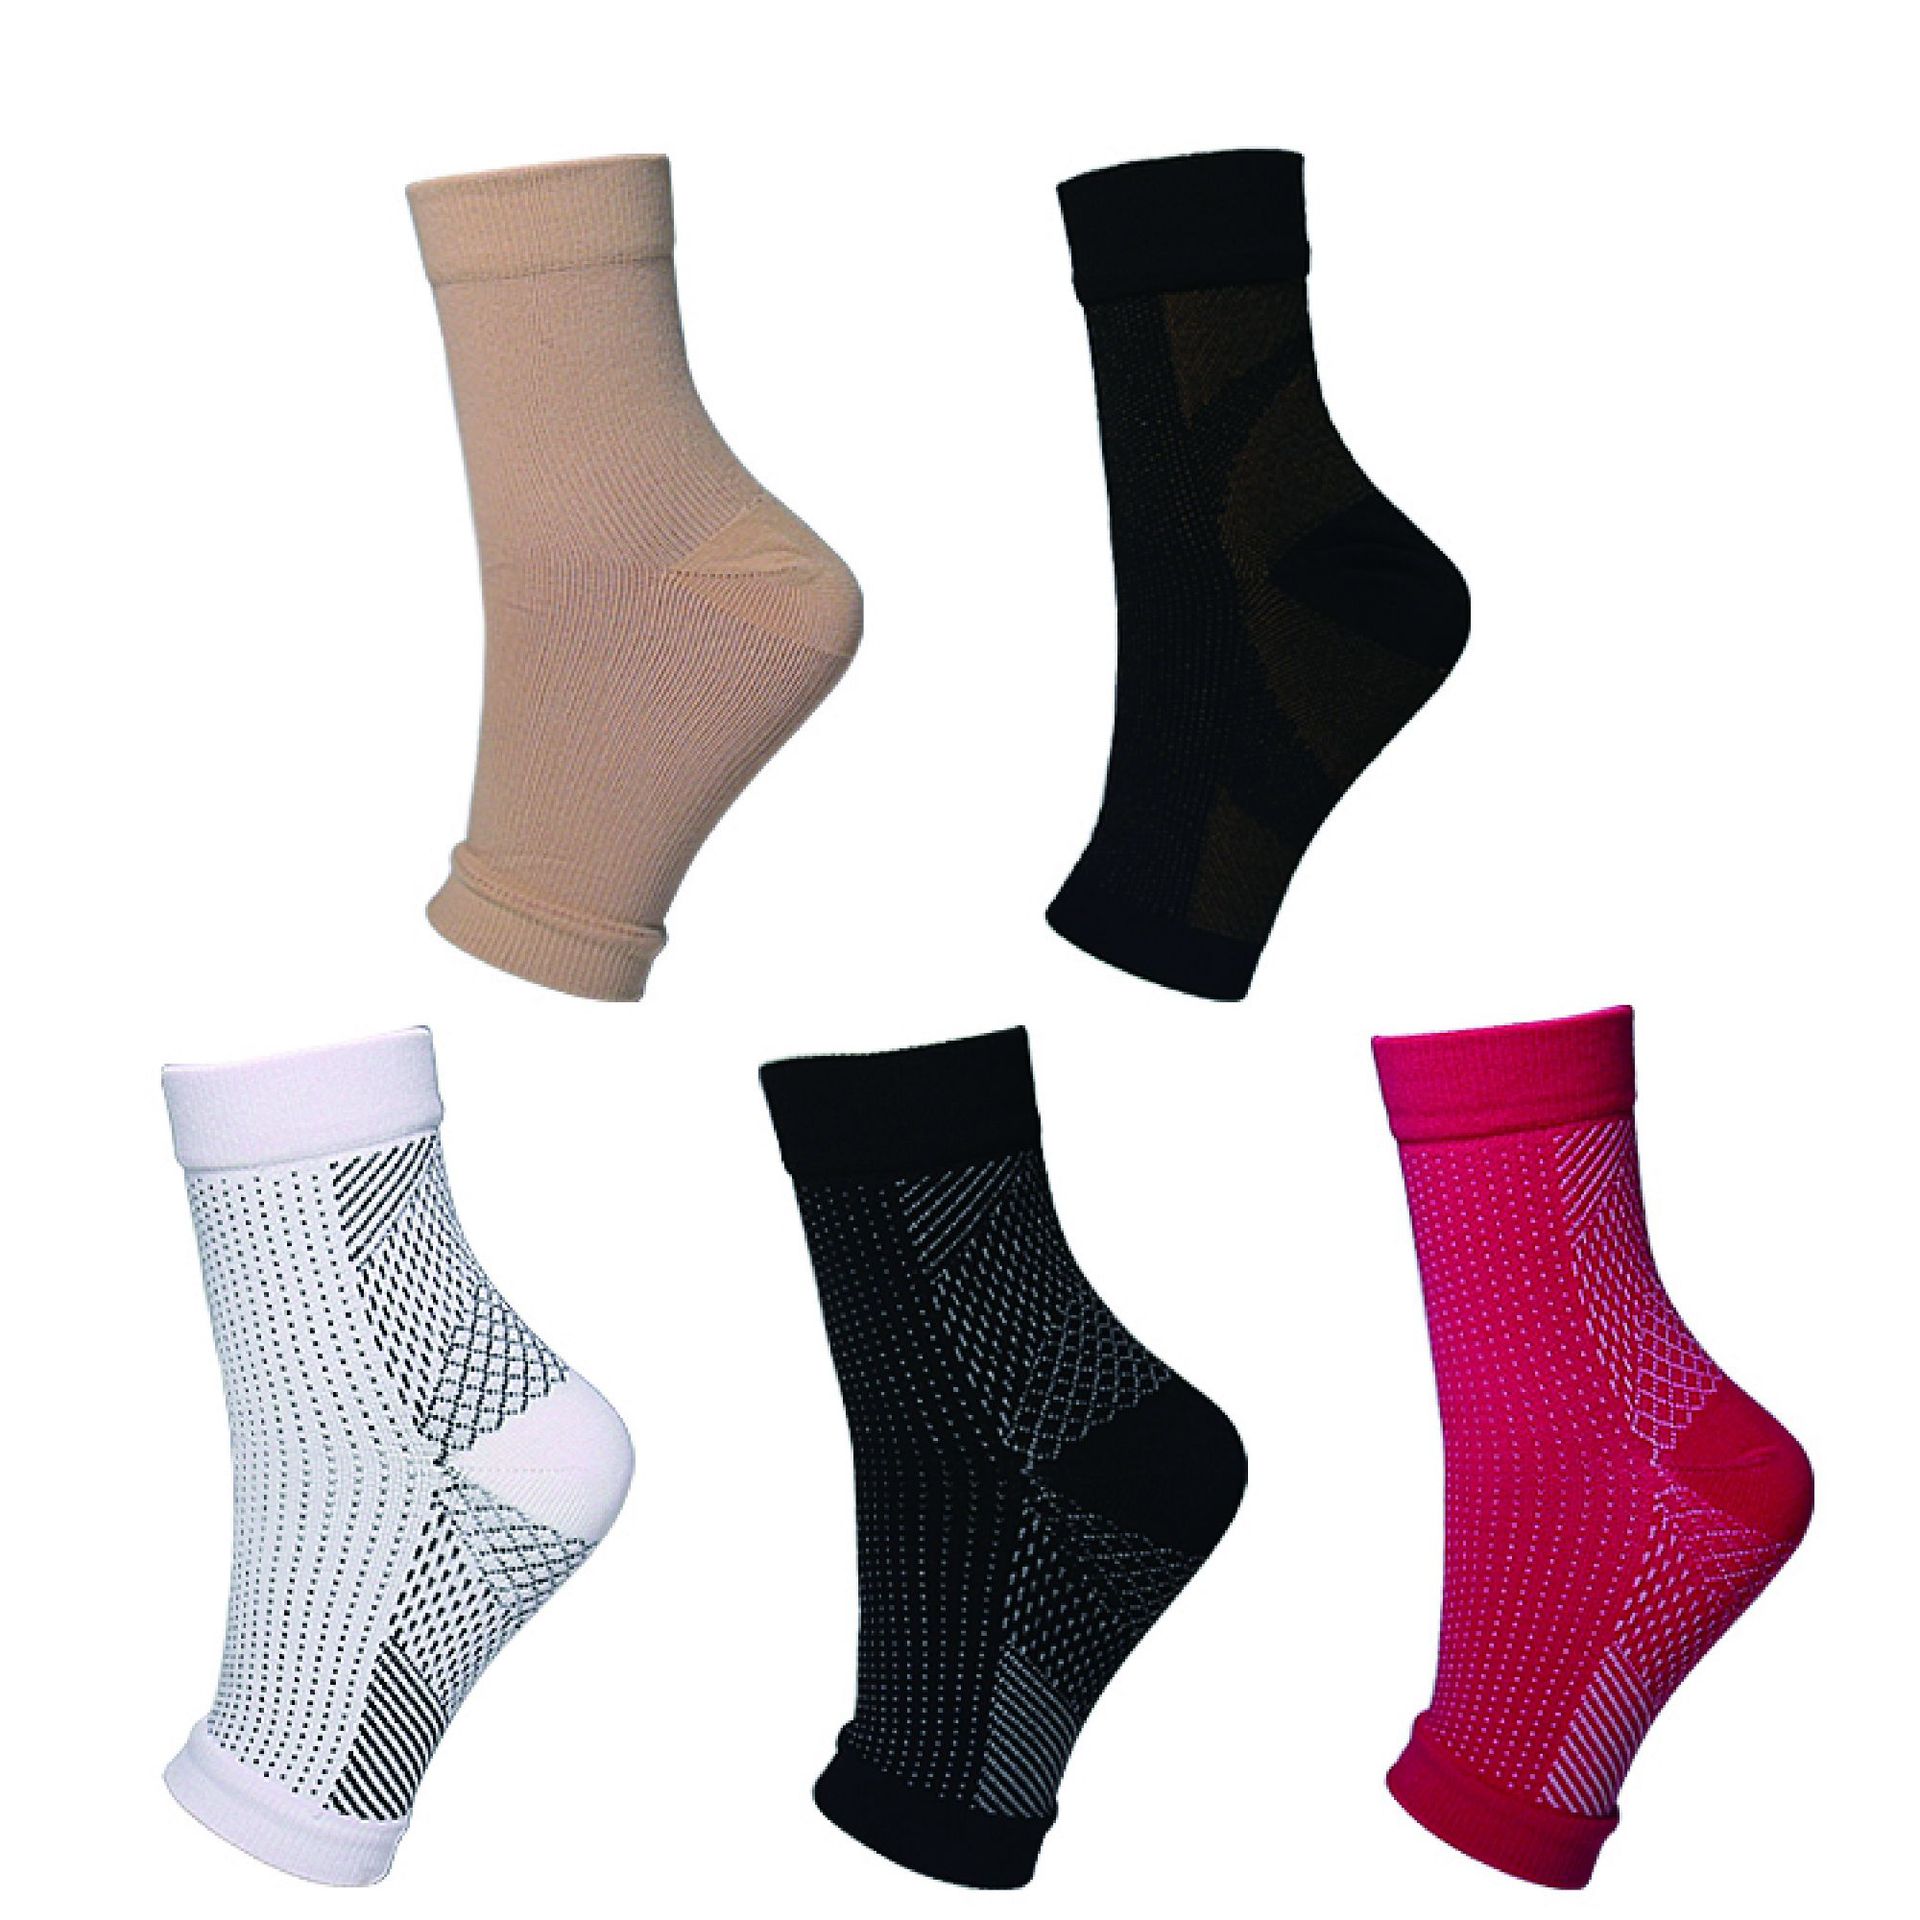 European and American Sports Calf Socks Outdoor Fitness Compression Socks Compression Stockings Skipping Rope Ankle and Wrist Guard Foot Sock Elastic Cycling Socks